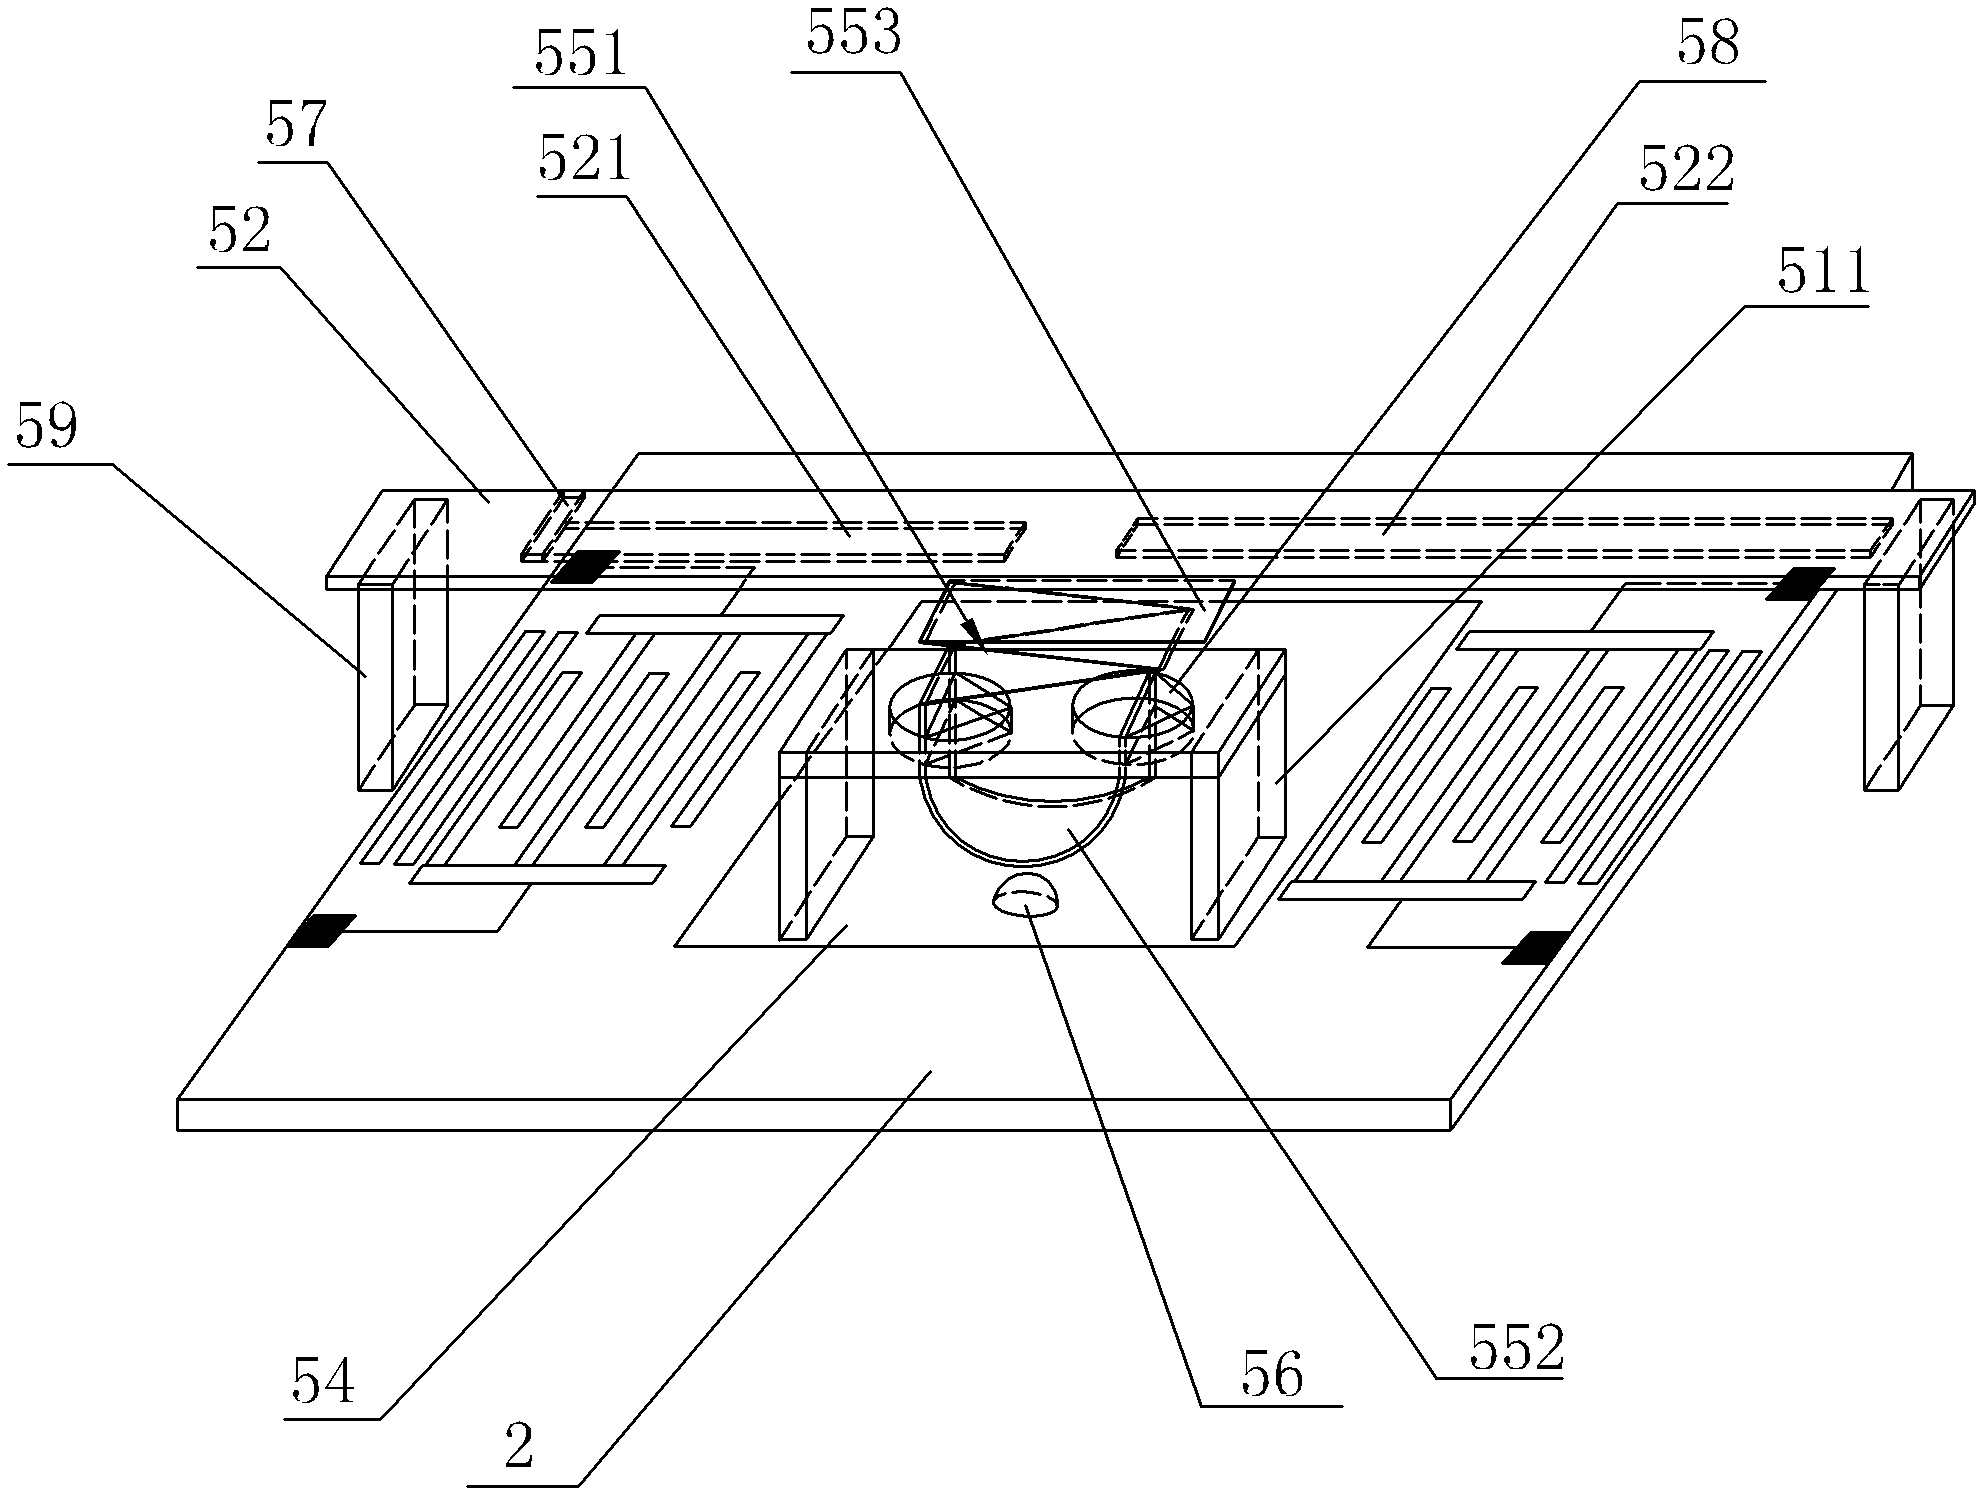 Paper-based micro-flow switch controlled by surface acoustic wave